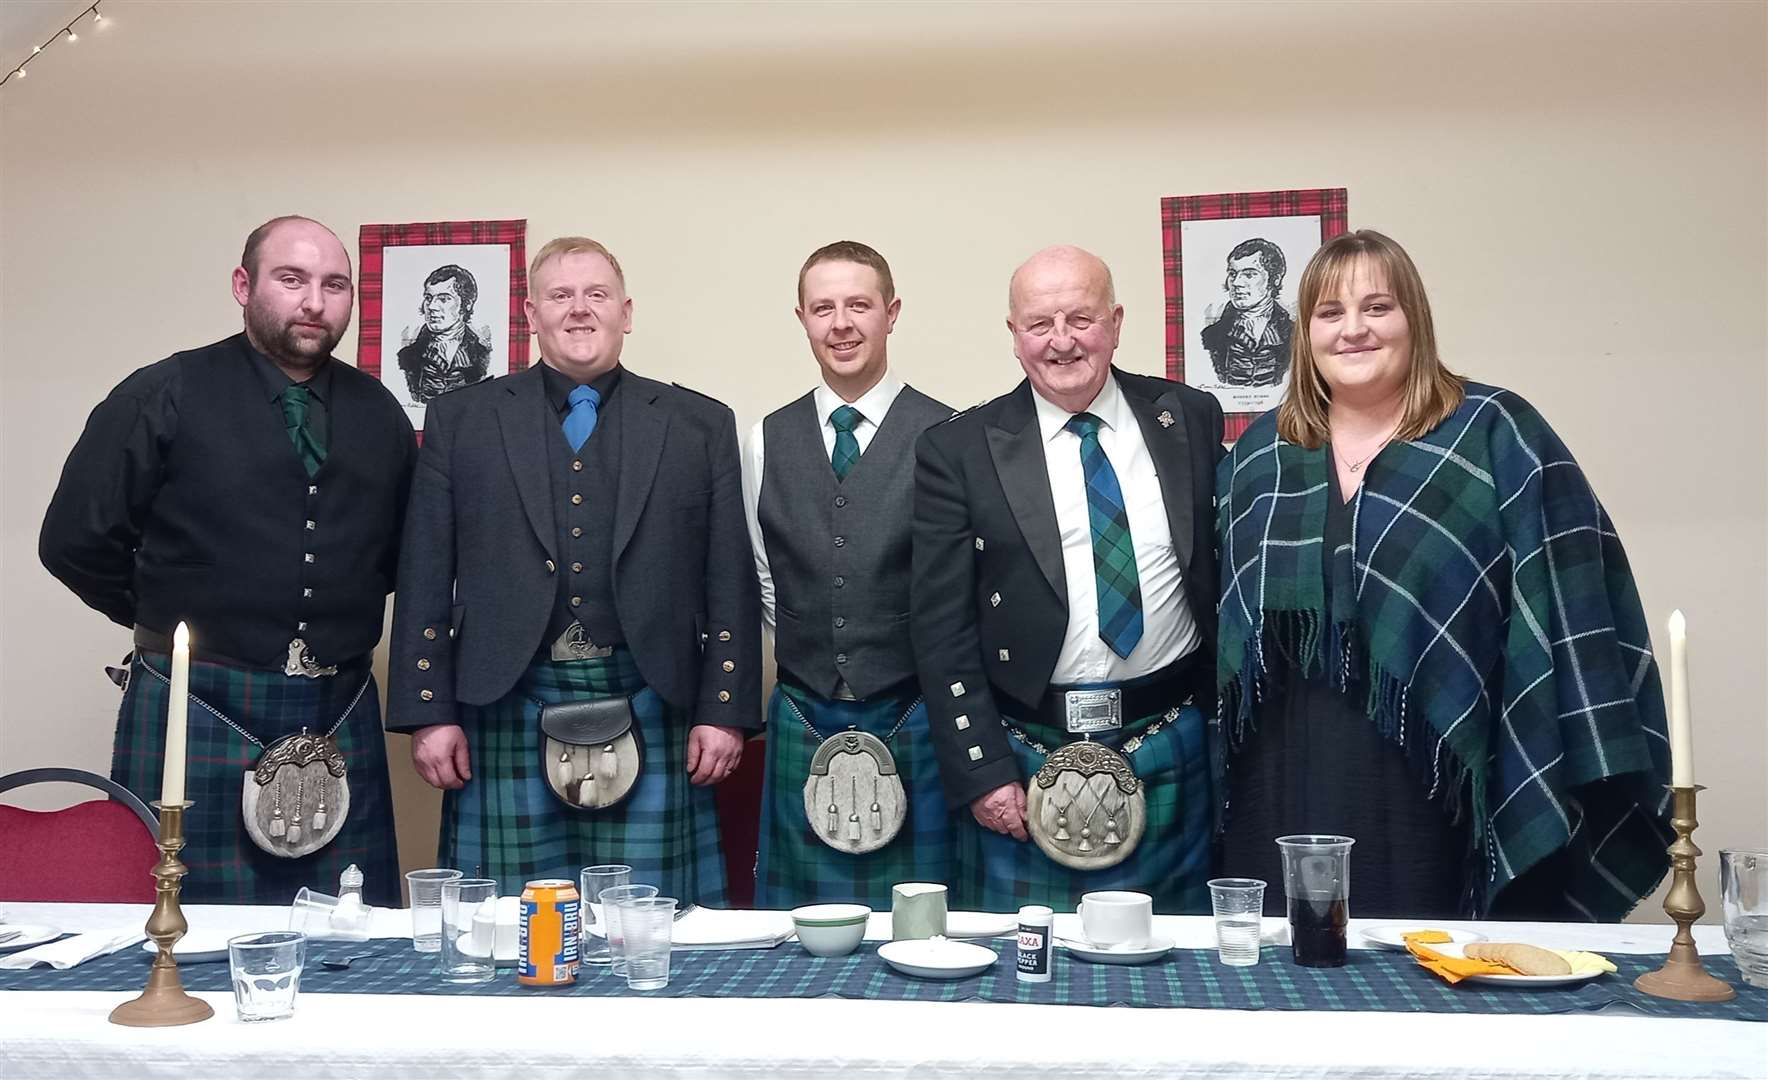 From left: Michael Gunn, Graham Mackay, Graeme Mackay, Willie Mackay and Suzanne Smith at the Burns supper in Forss.